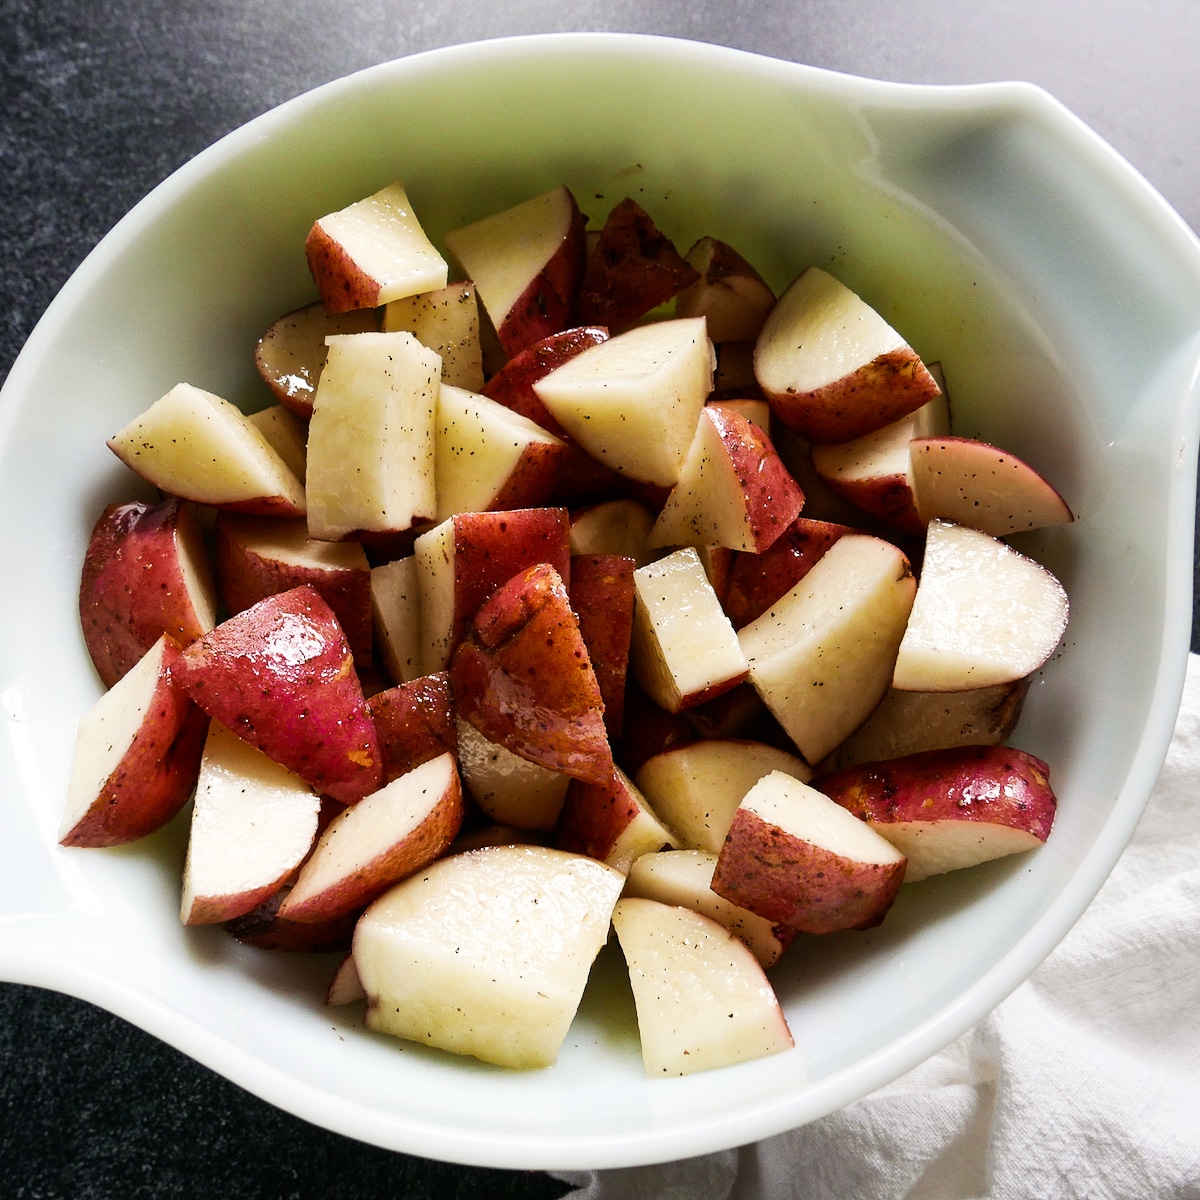 Sliced red potatoes tossed in olive oil in a mixing bowl.